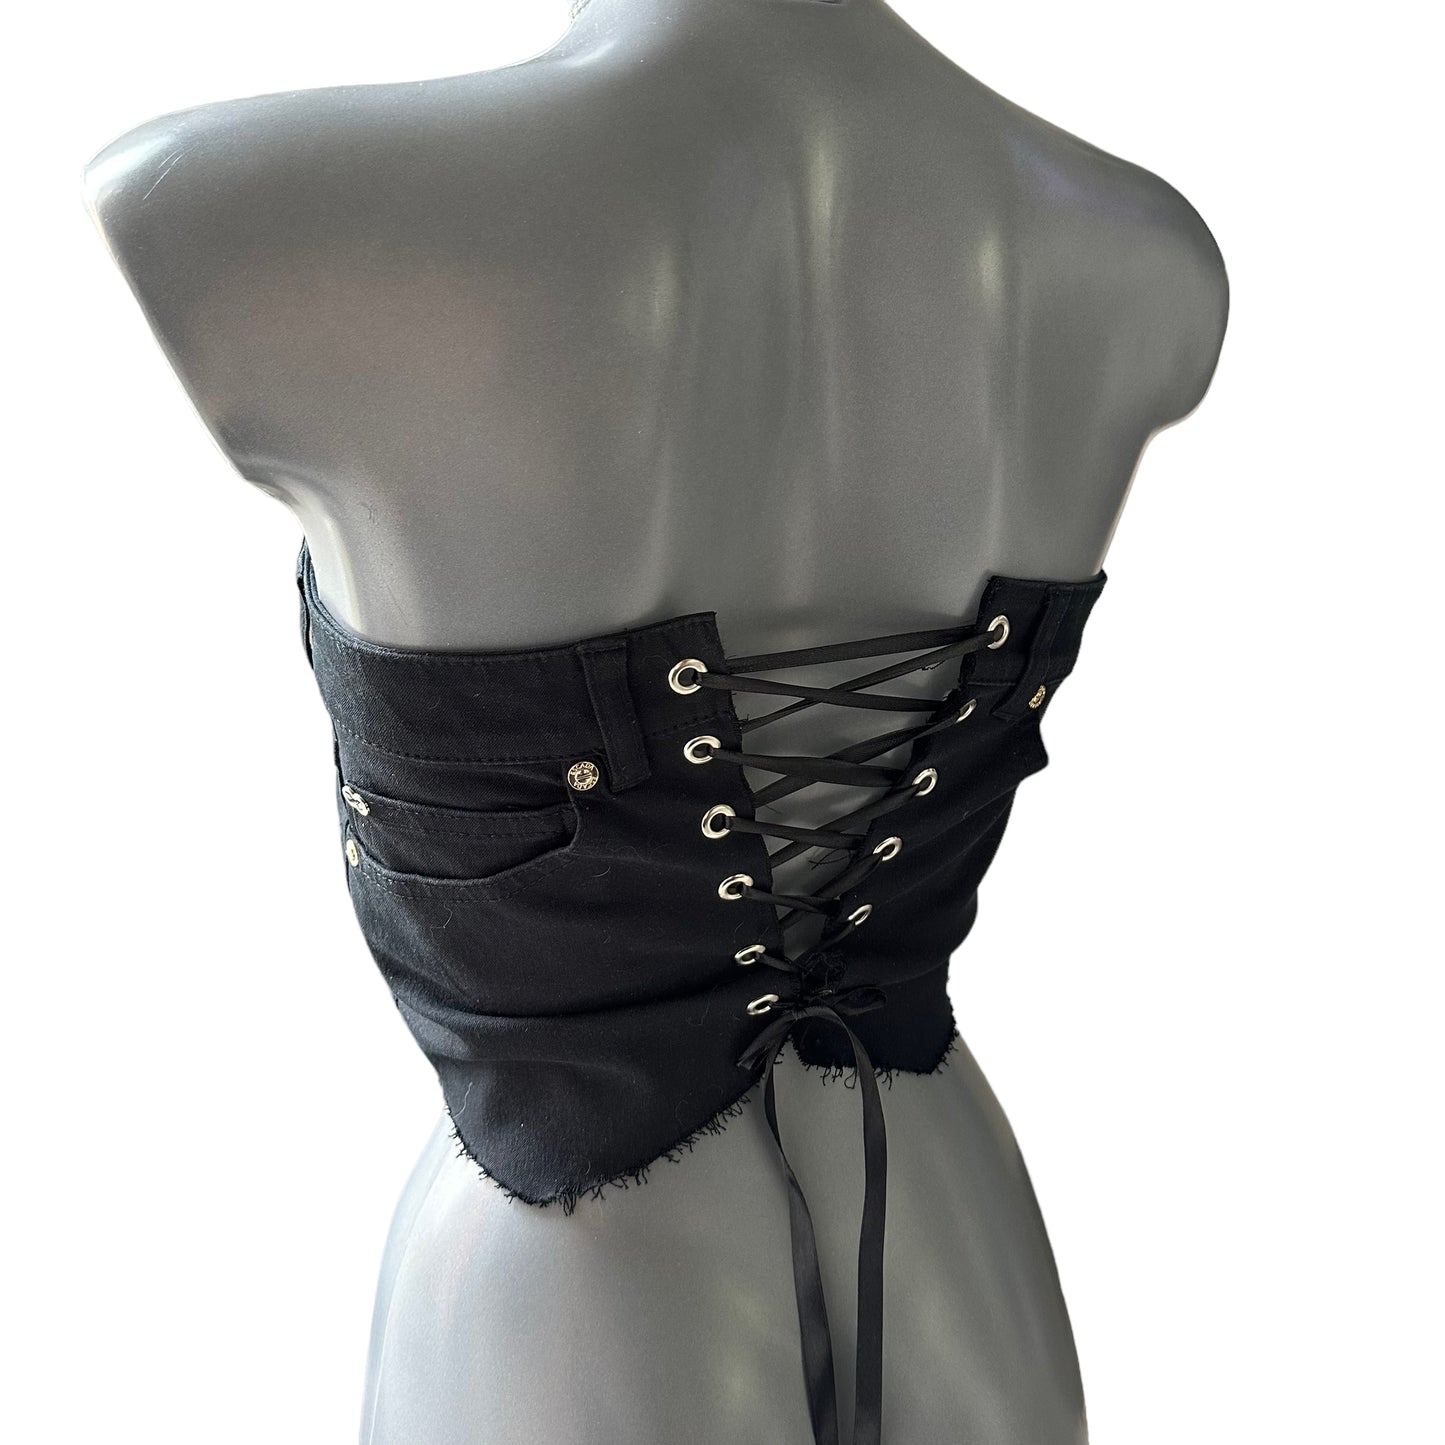 Authentic Escada Jeans Reworked into a Black Denim Corset Top with Crystal Lacing Small 6 8 10